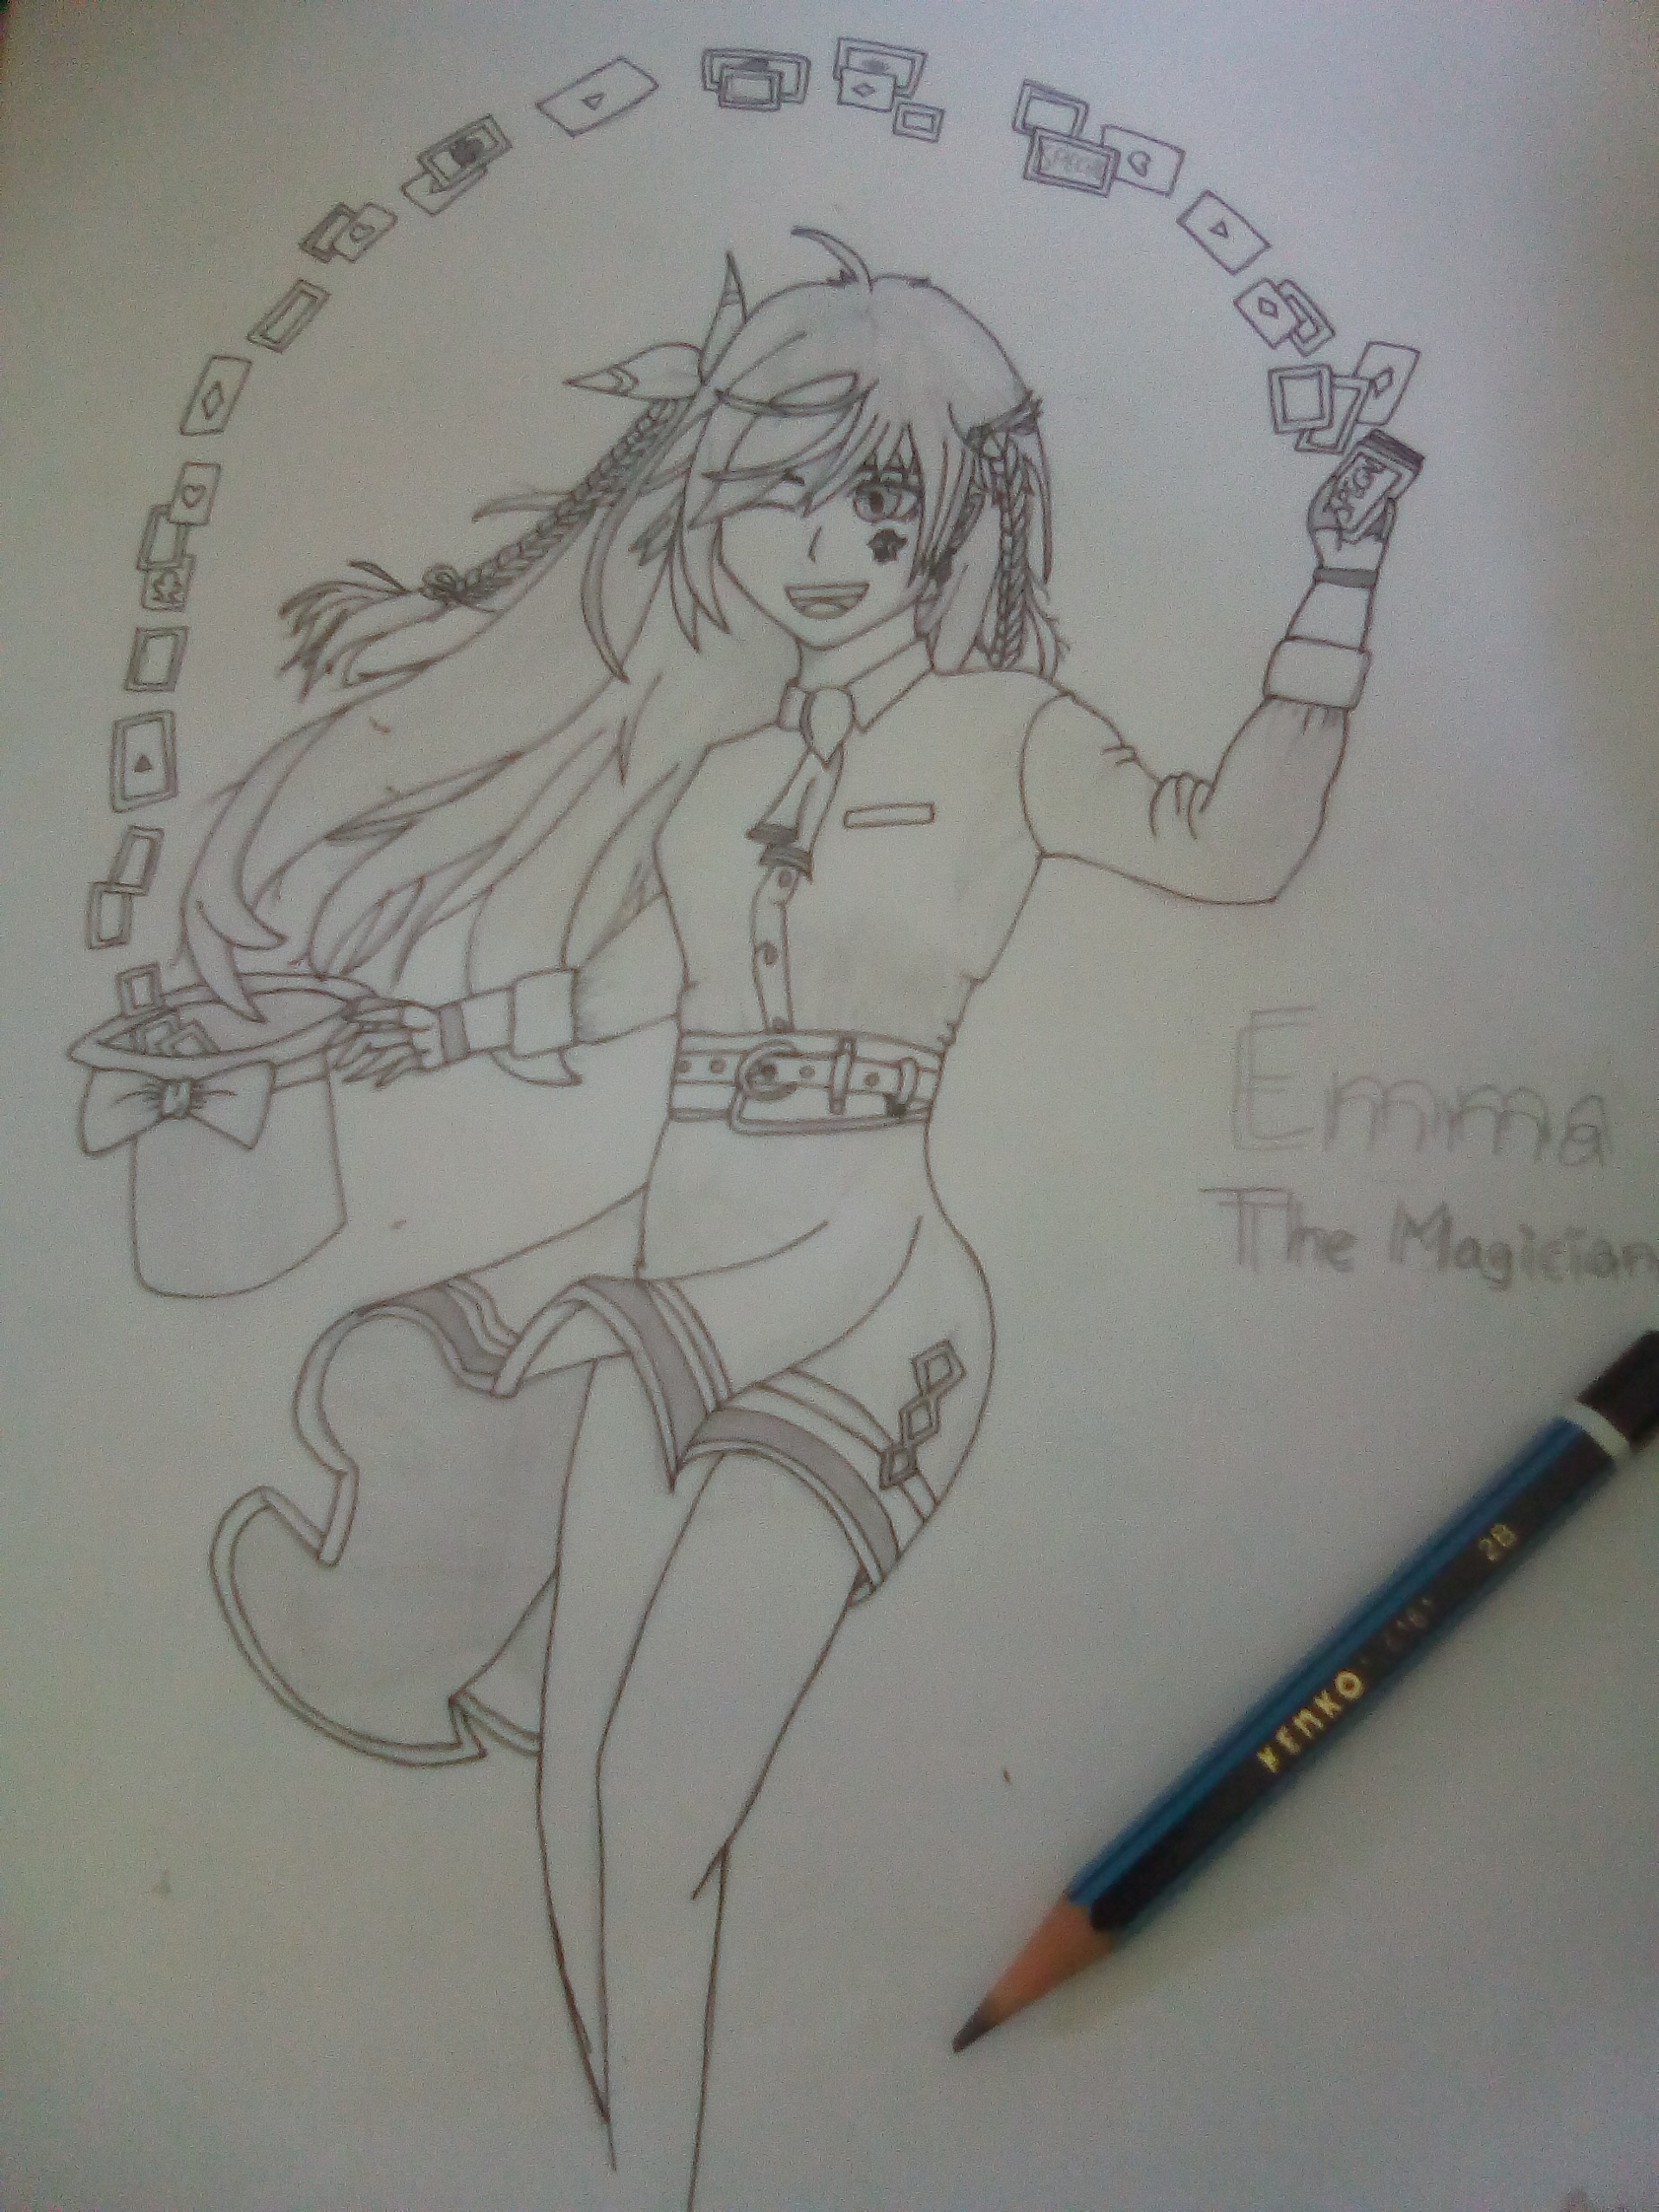 Fanart character of Emma from Black Survival